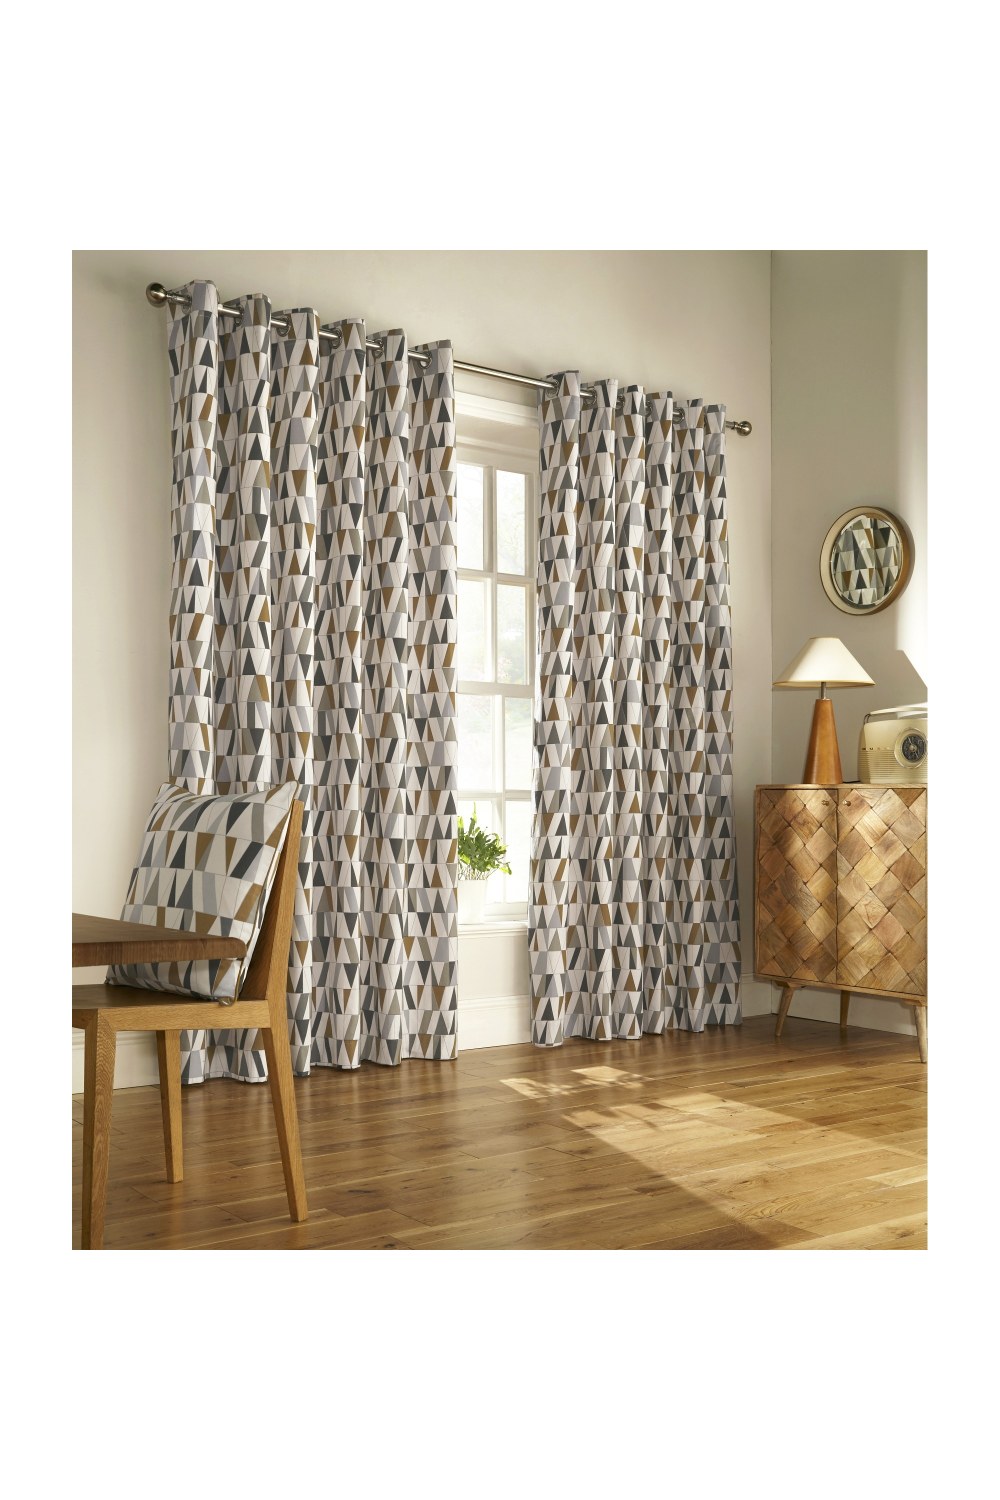 Furn Reno Ringtop Geometric Eyelet Curtains (Charcoal/Gold) (46in x 54in)